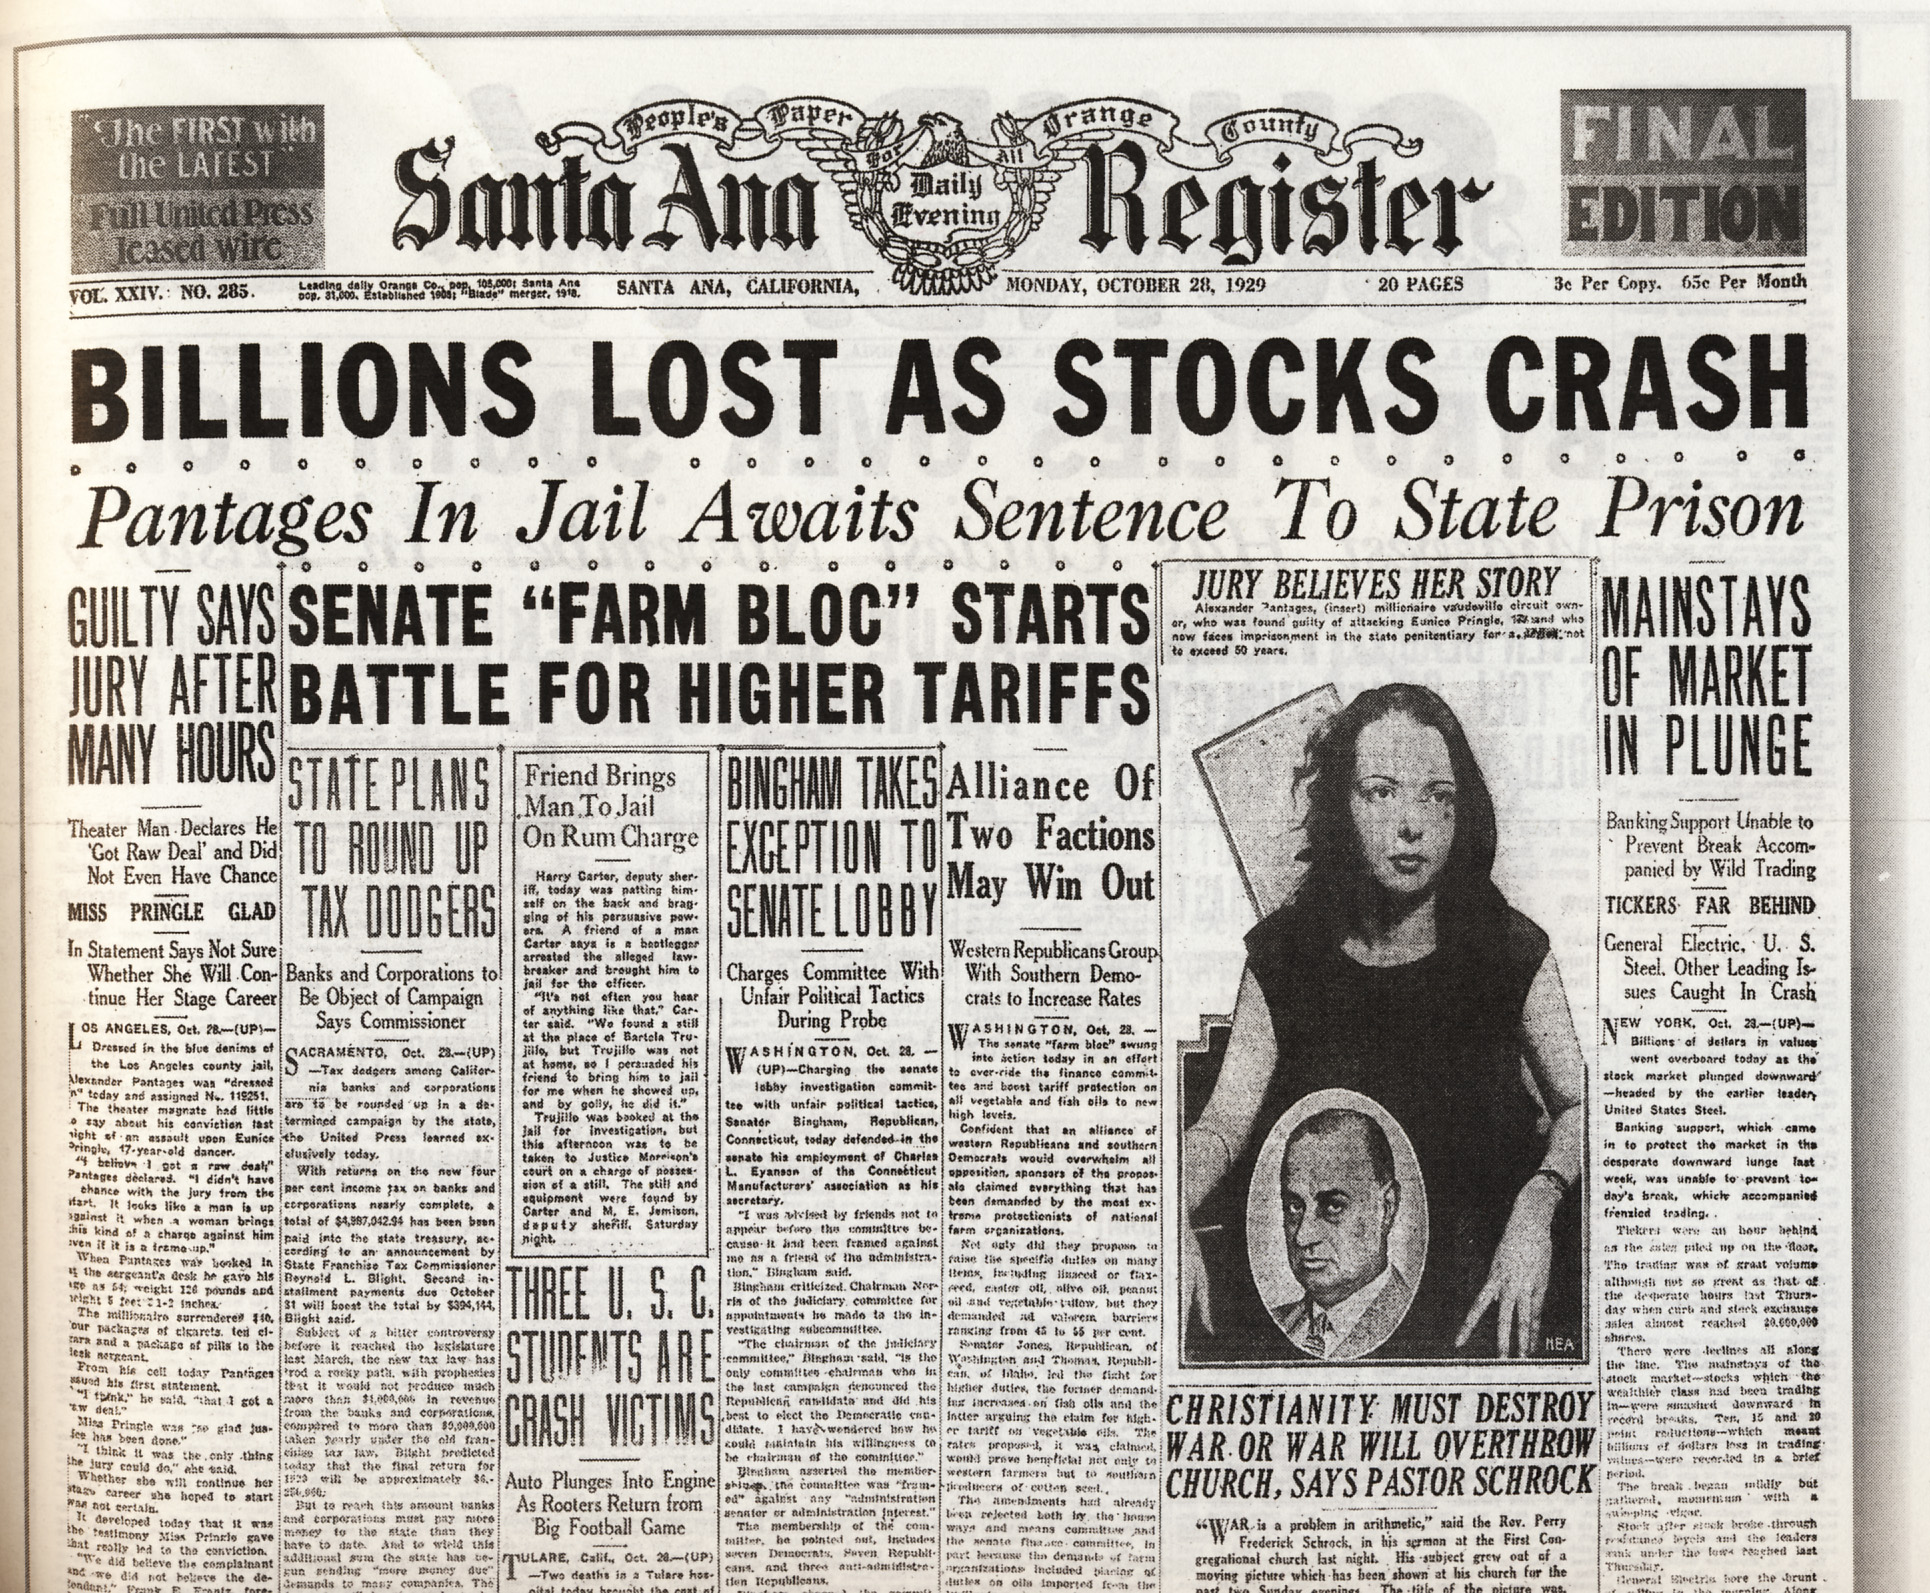 immediate cause of stock market crash in 1929